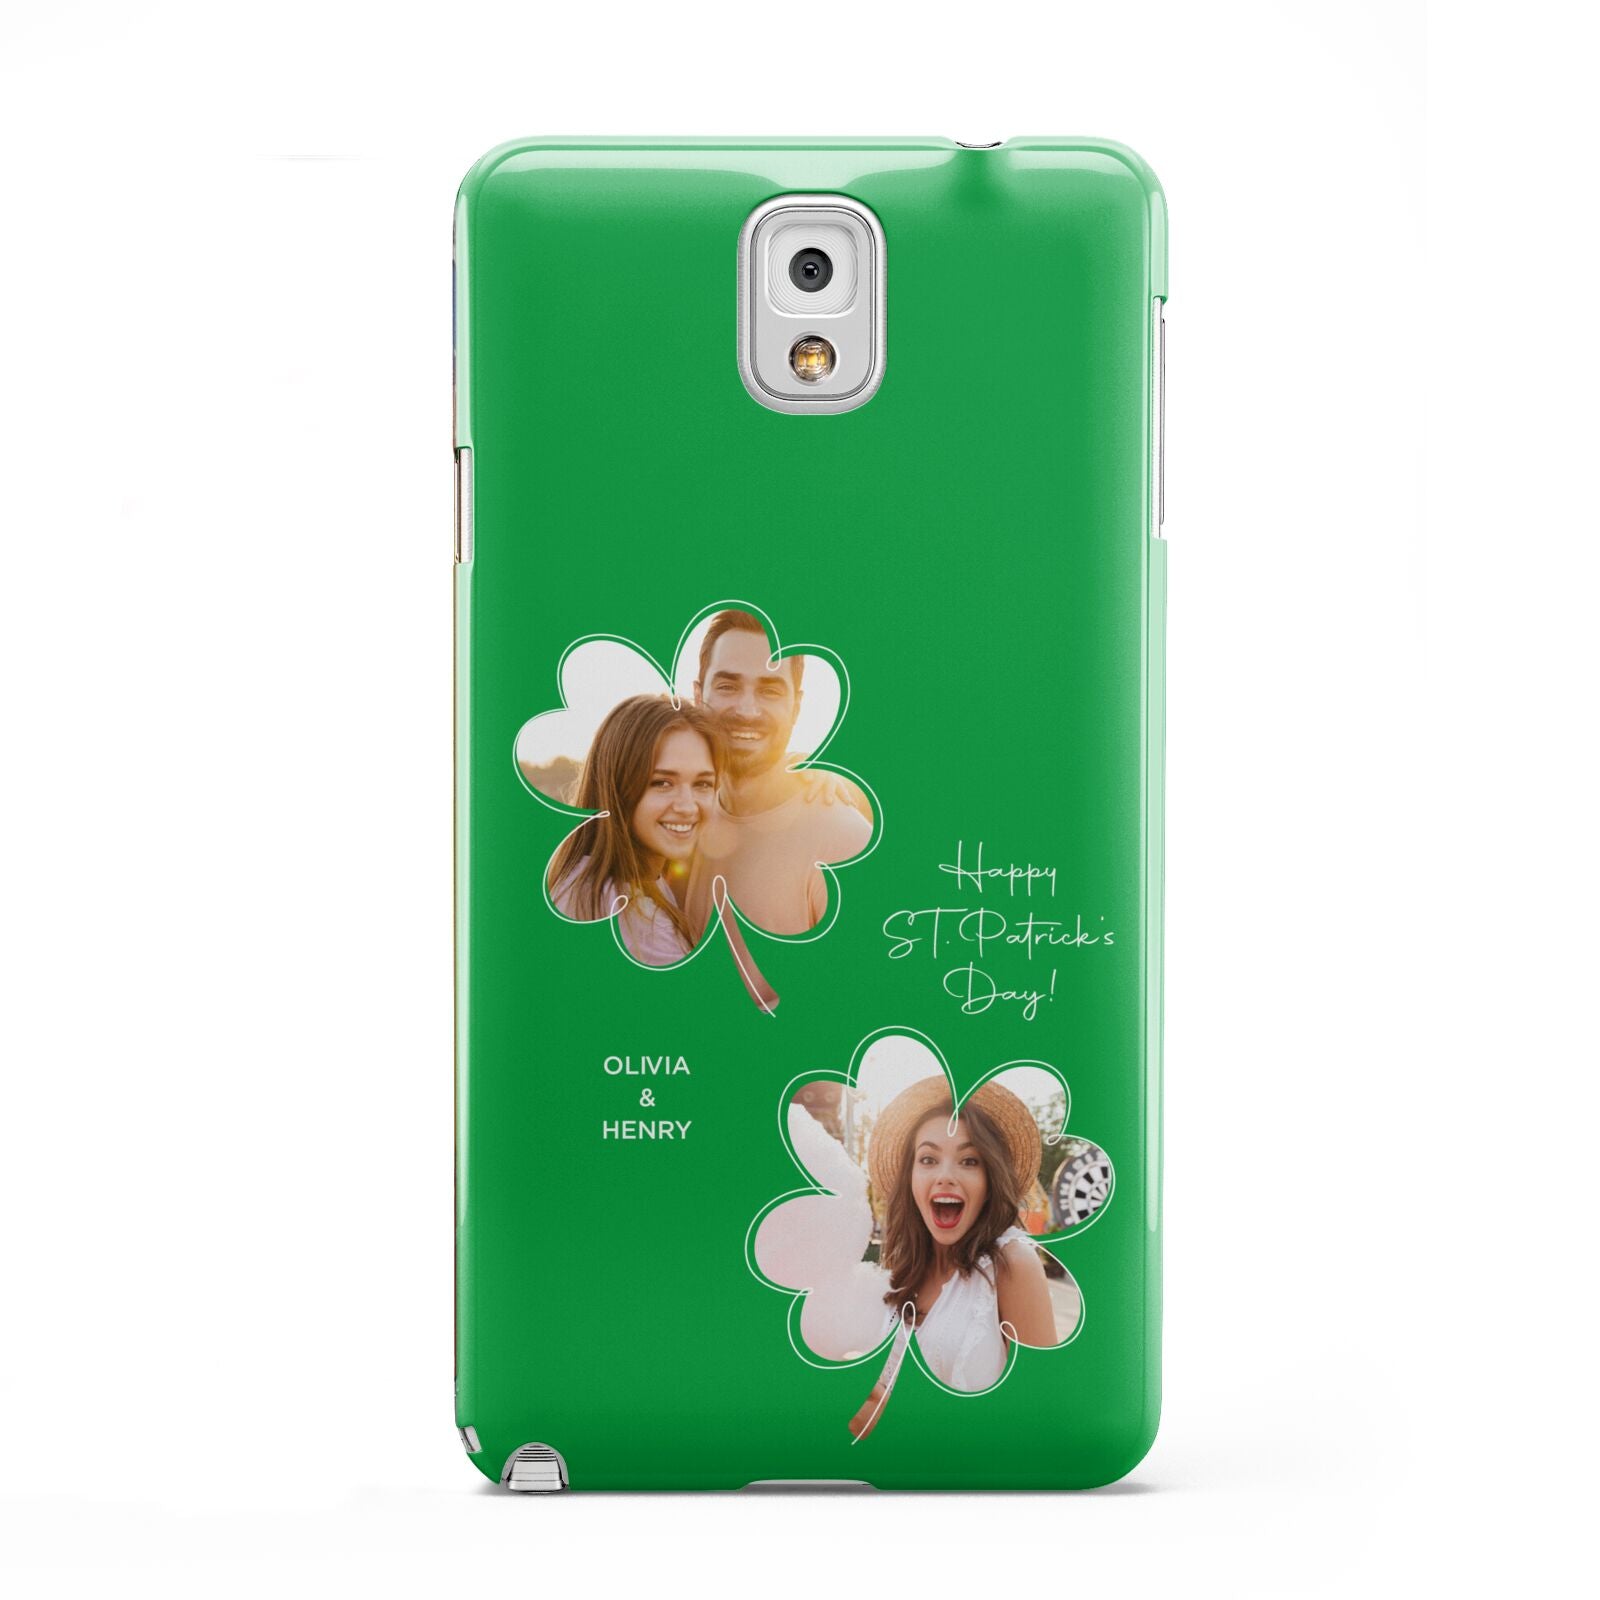 Personalised Photo St Patricks Day Samsung Galaxy Note 3 Case